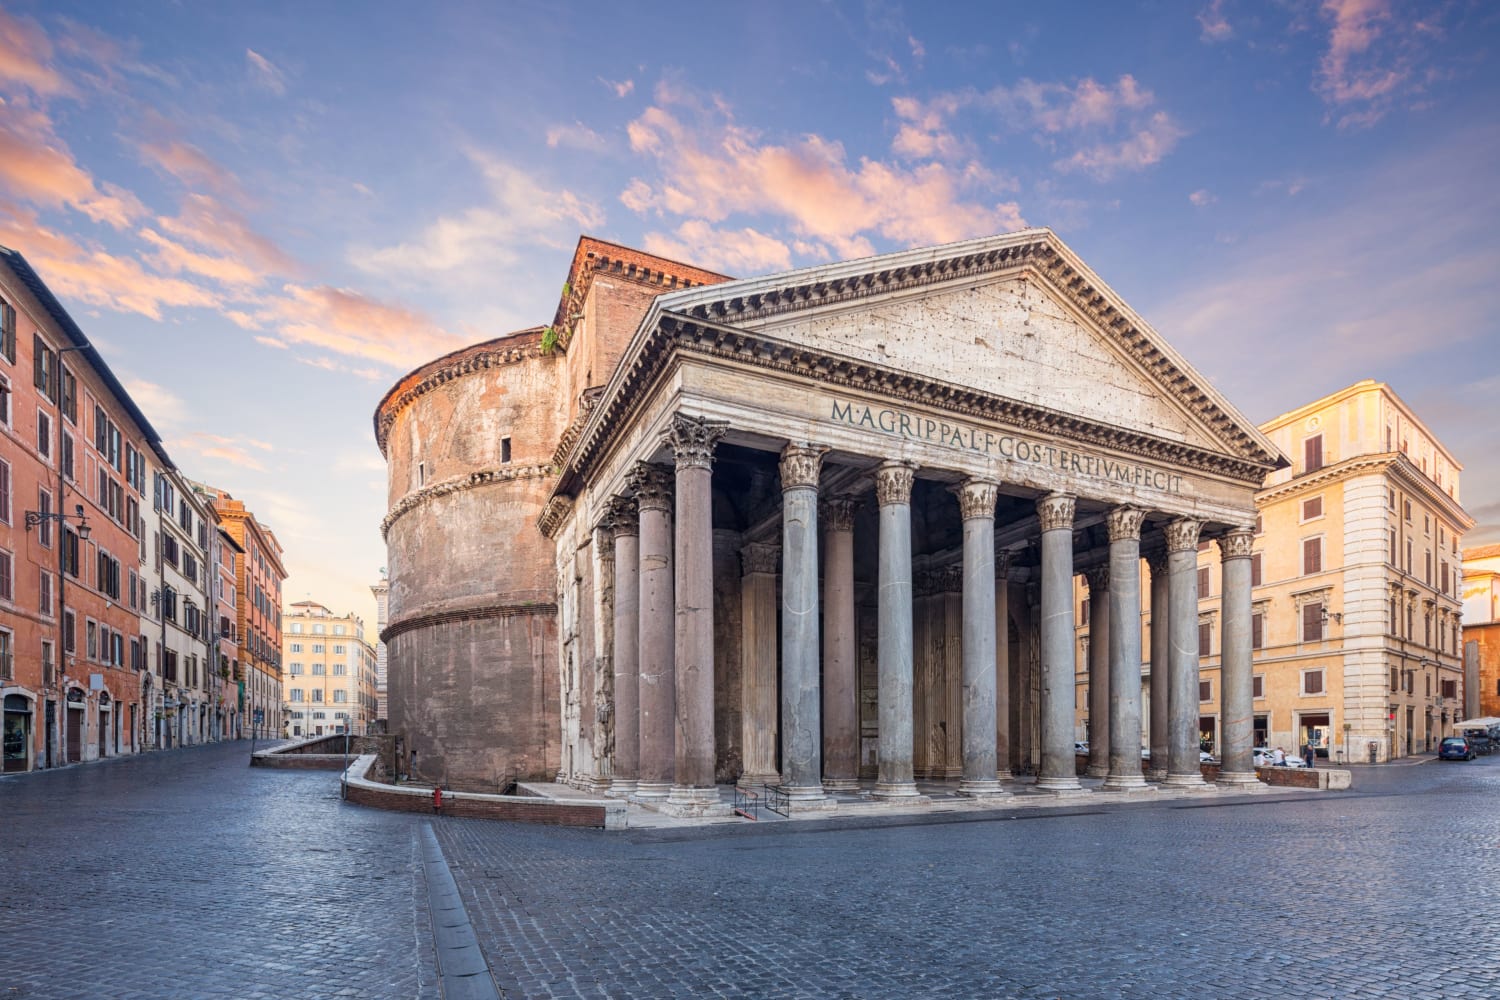 The Pantheon in Rome, Italy. Built as a roman temple by the emperor Hadrian, it's now a Catholic church.